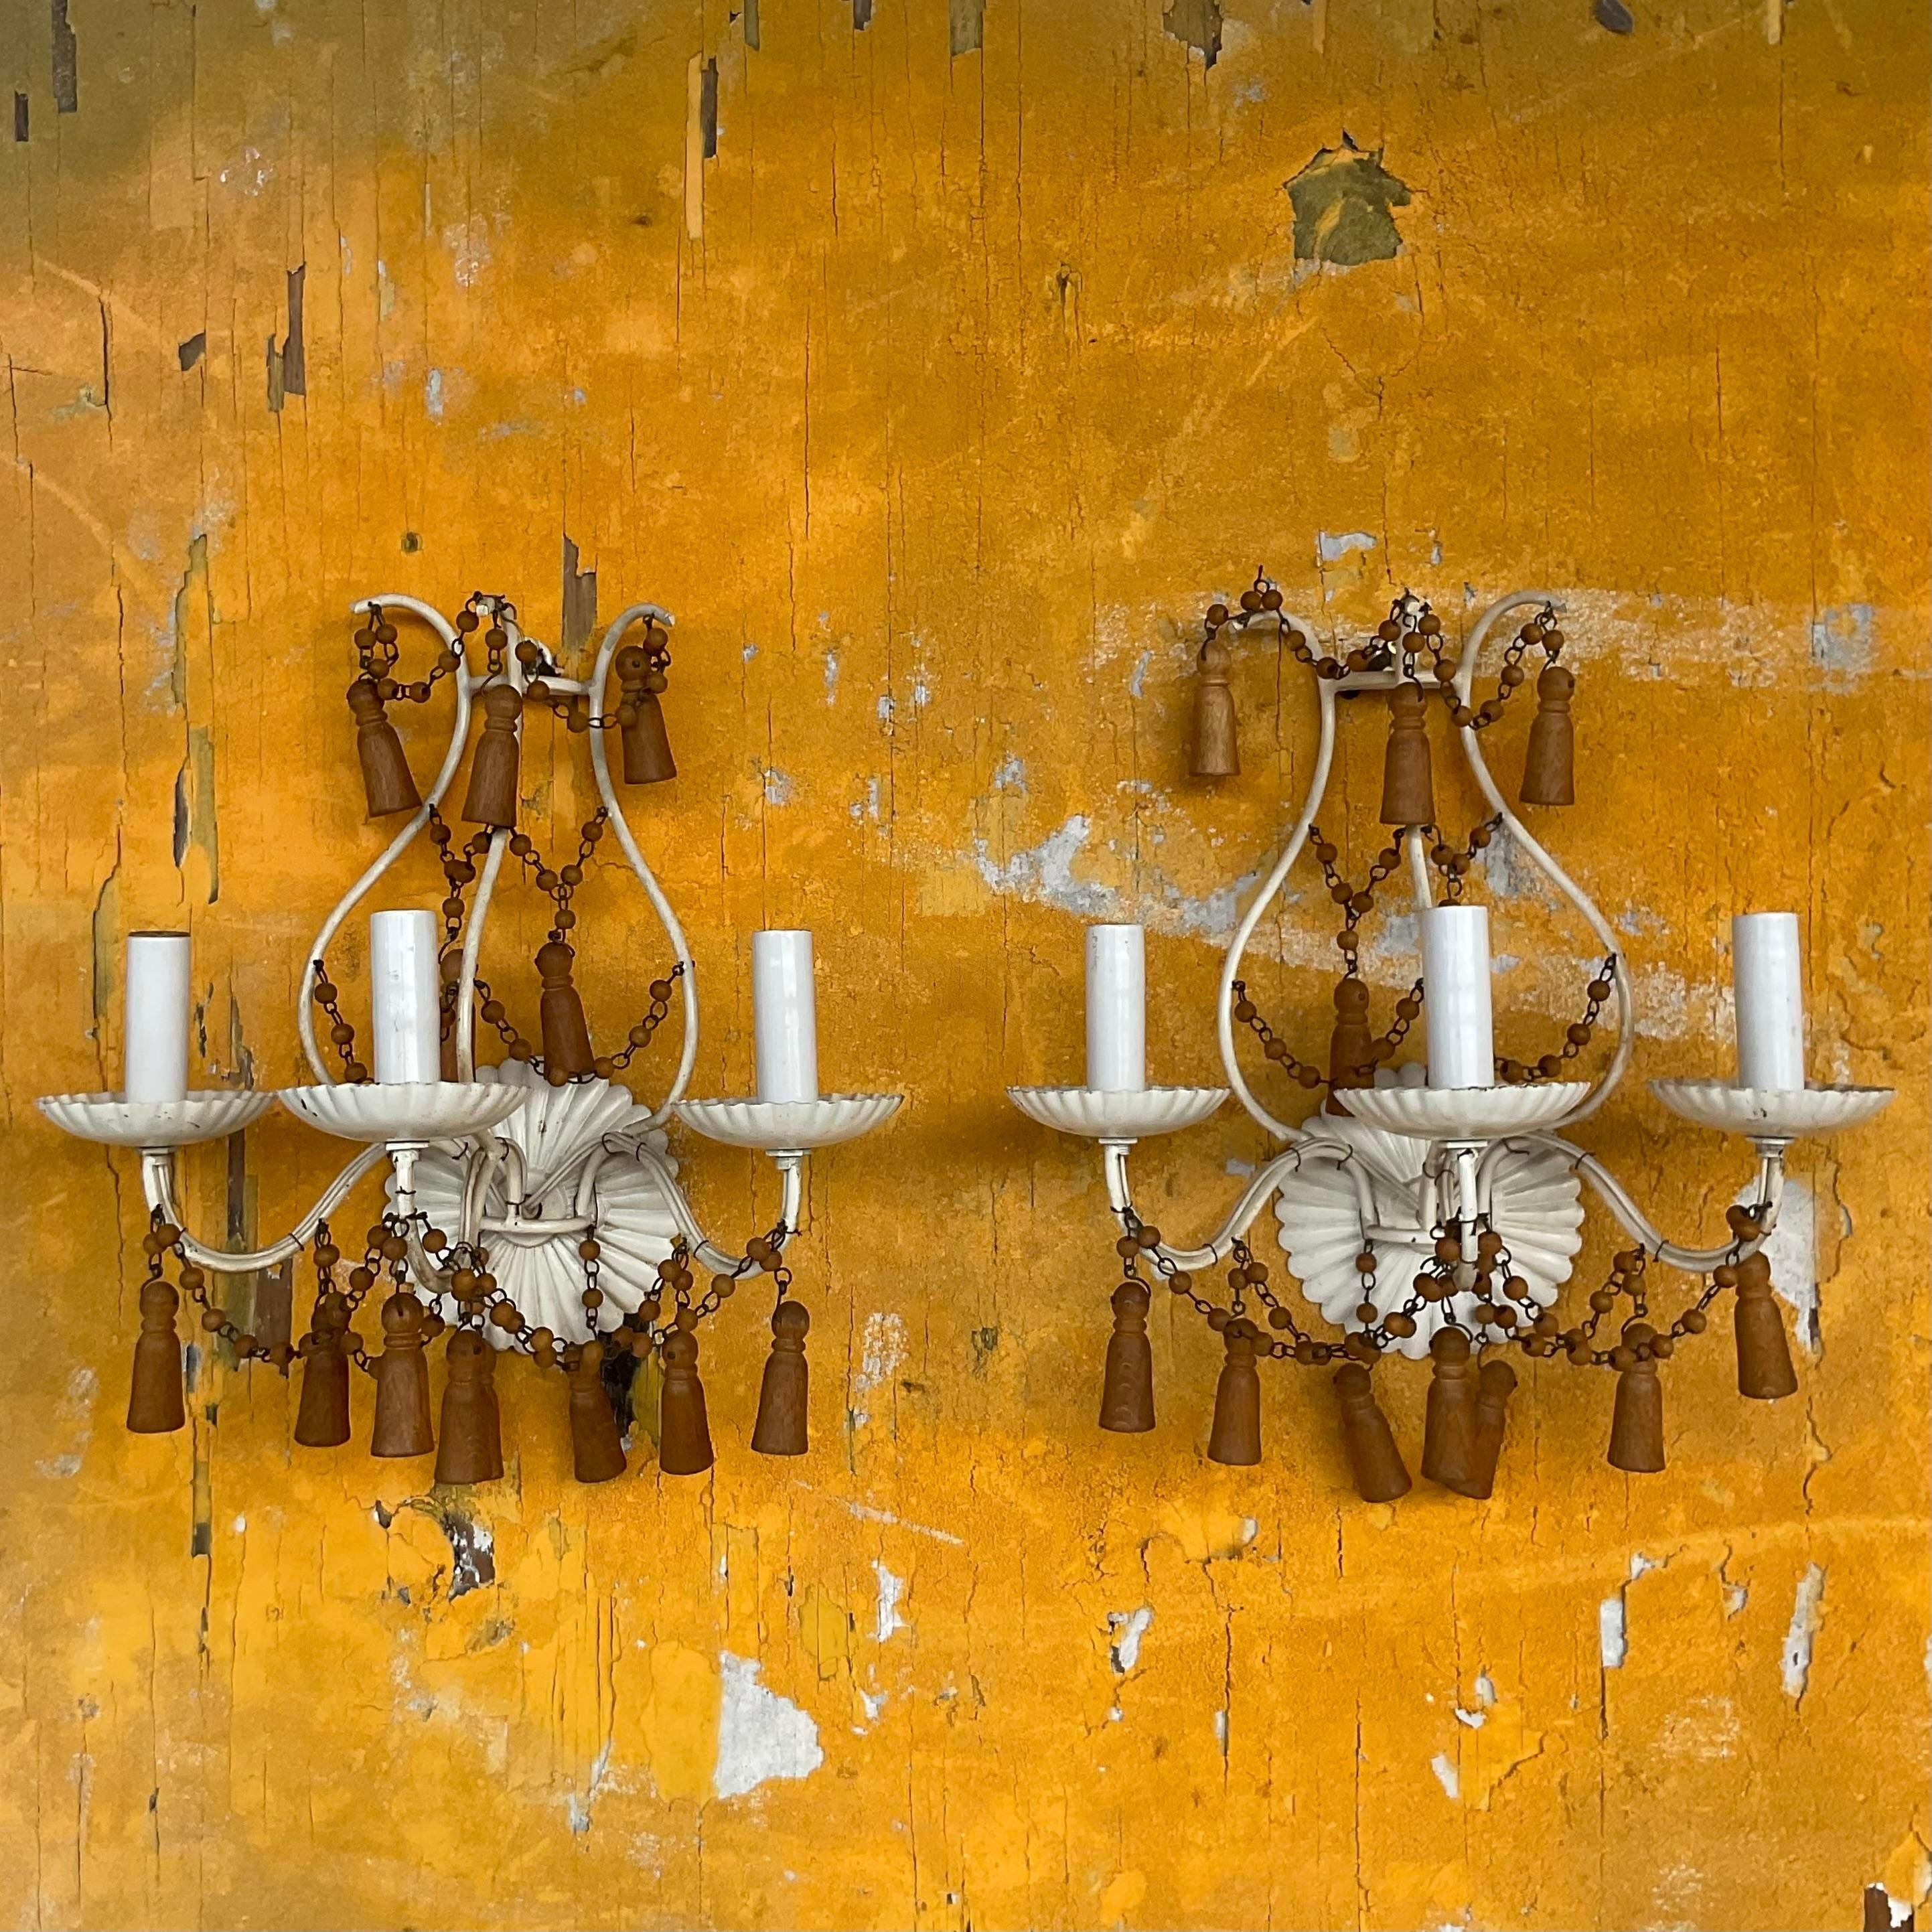 Early 20th Century Vintage Boho Wooden Teardrop Wall Sconces - a Pair In Good Condition For Sale In west palm beach, FL